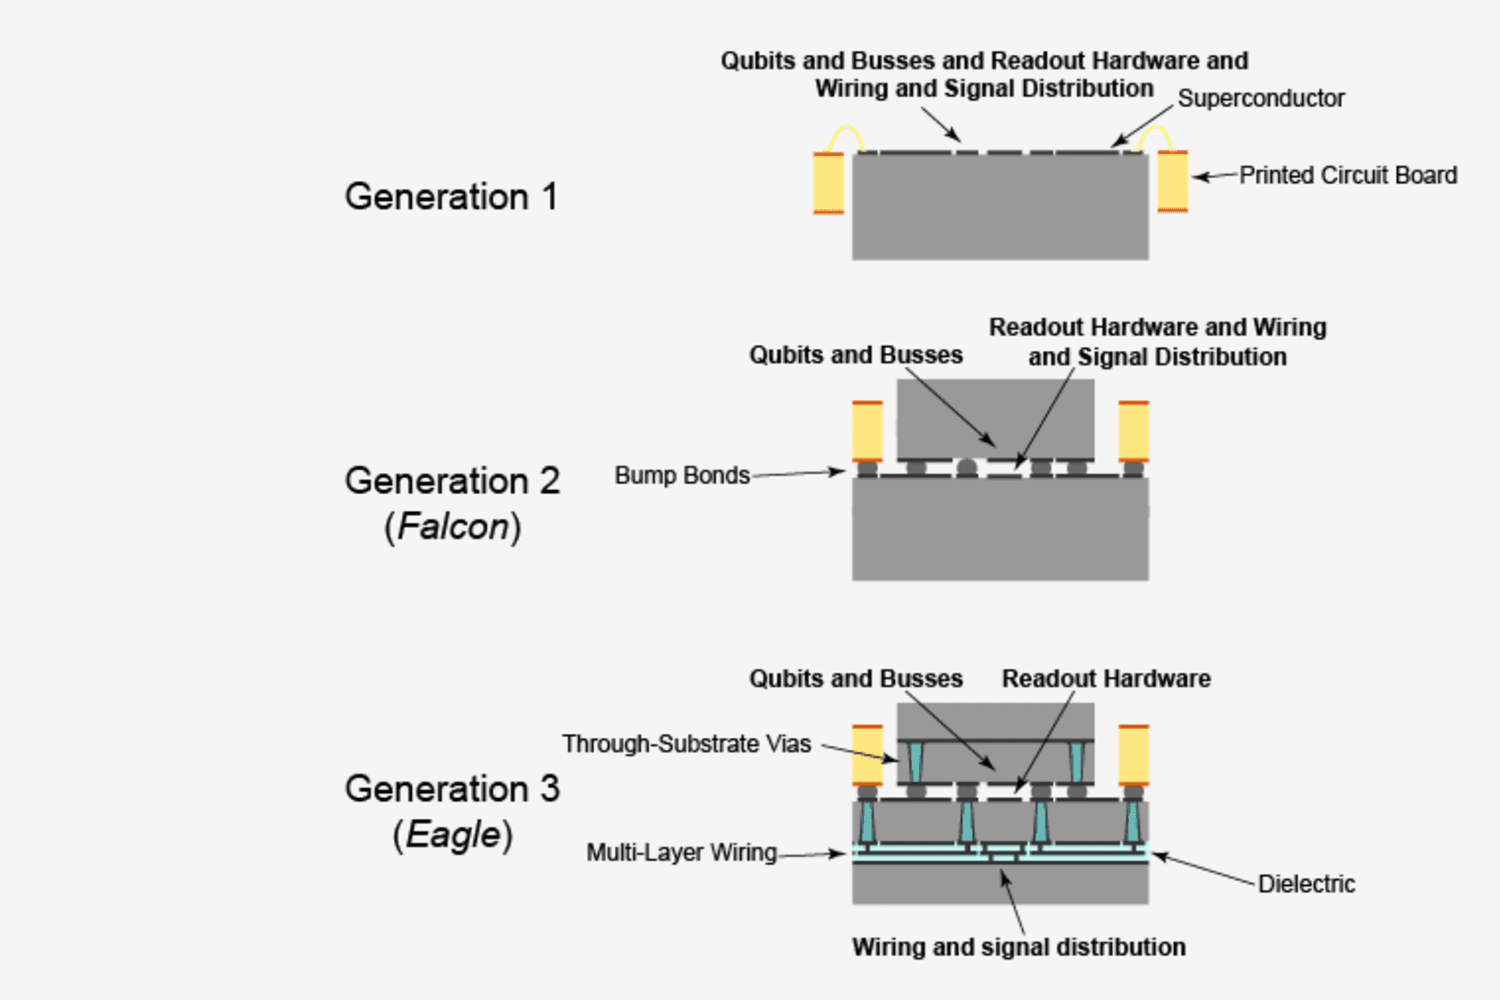 Qubit, bus, readout hardware, and wiring and signal distribution across Falcon and Eagle processors.